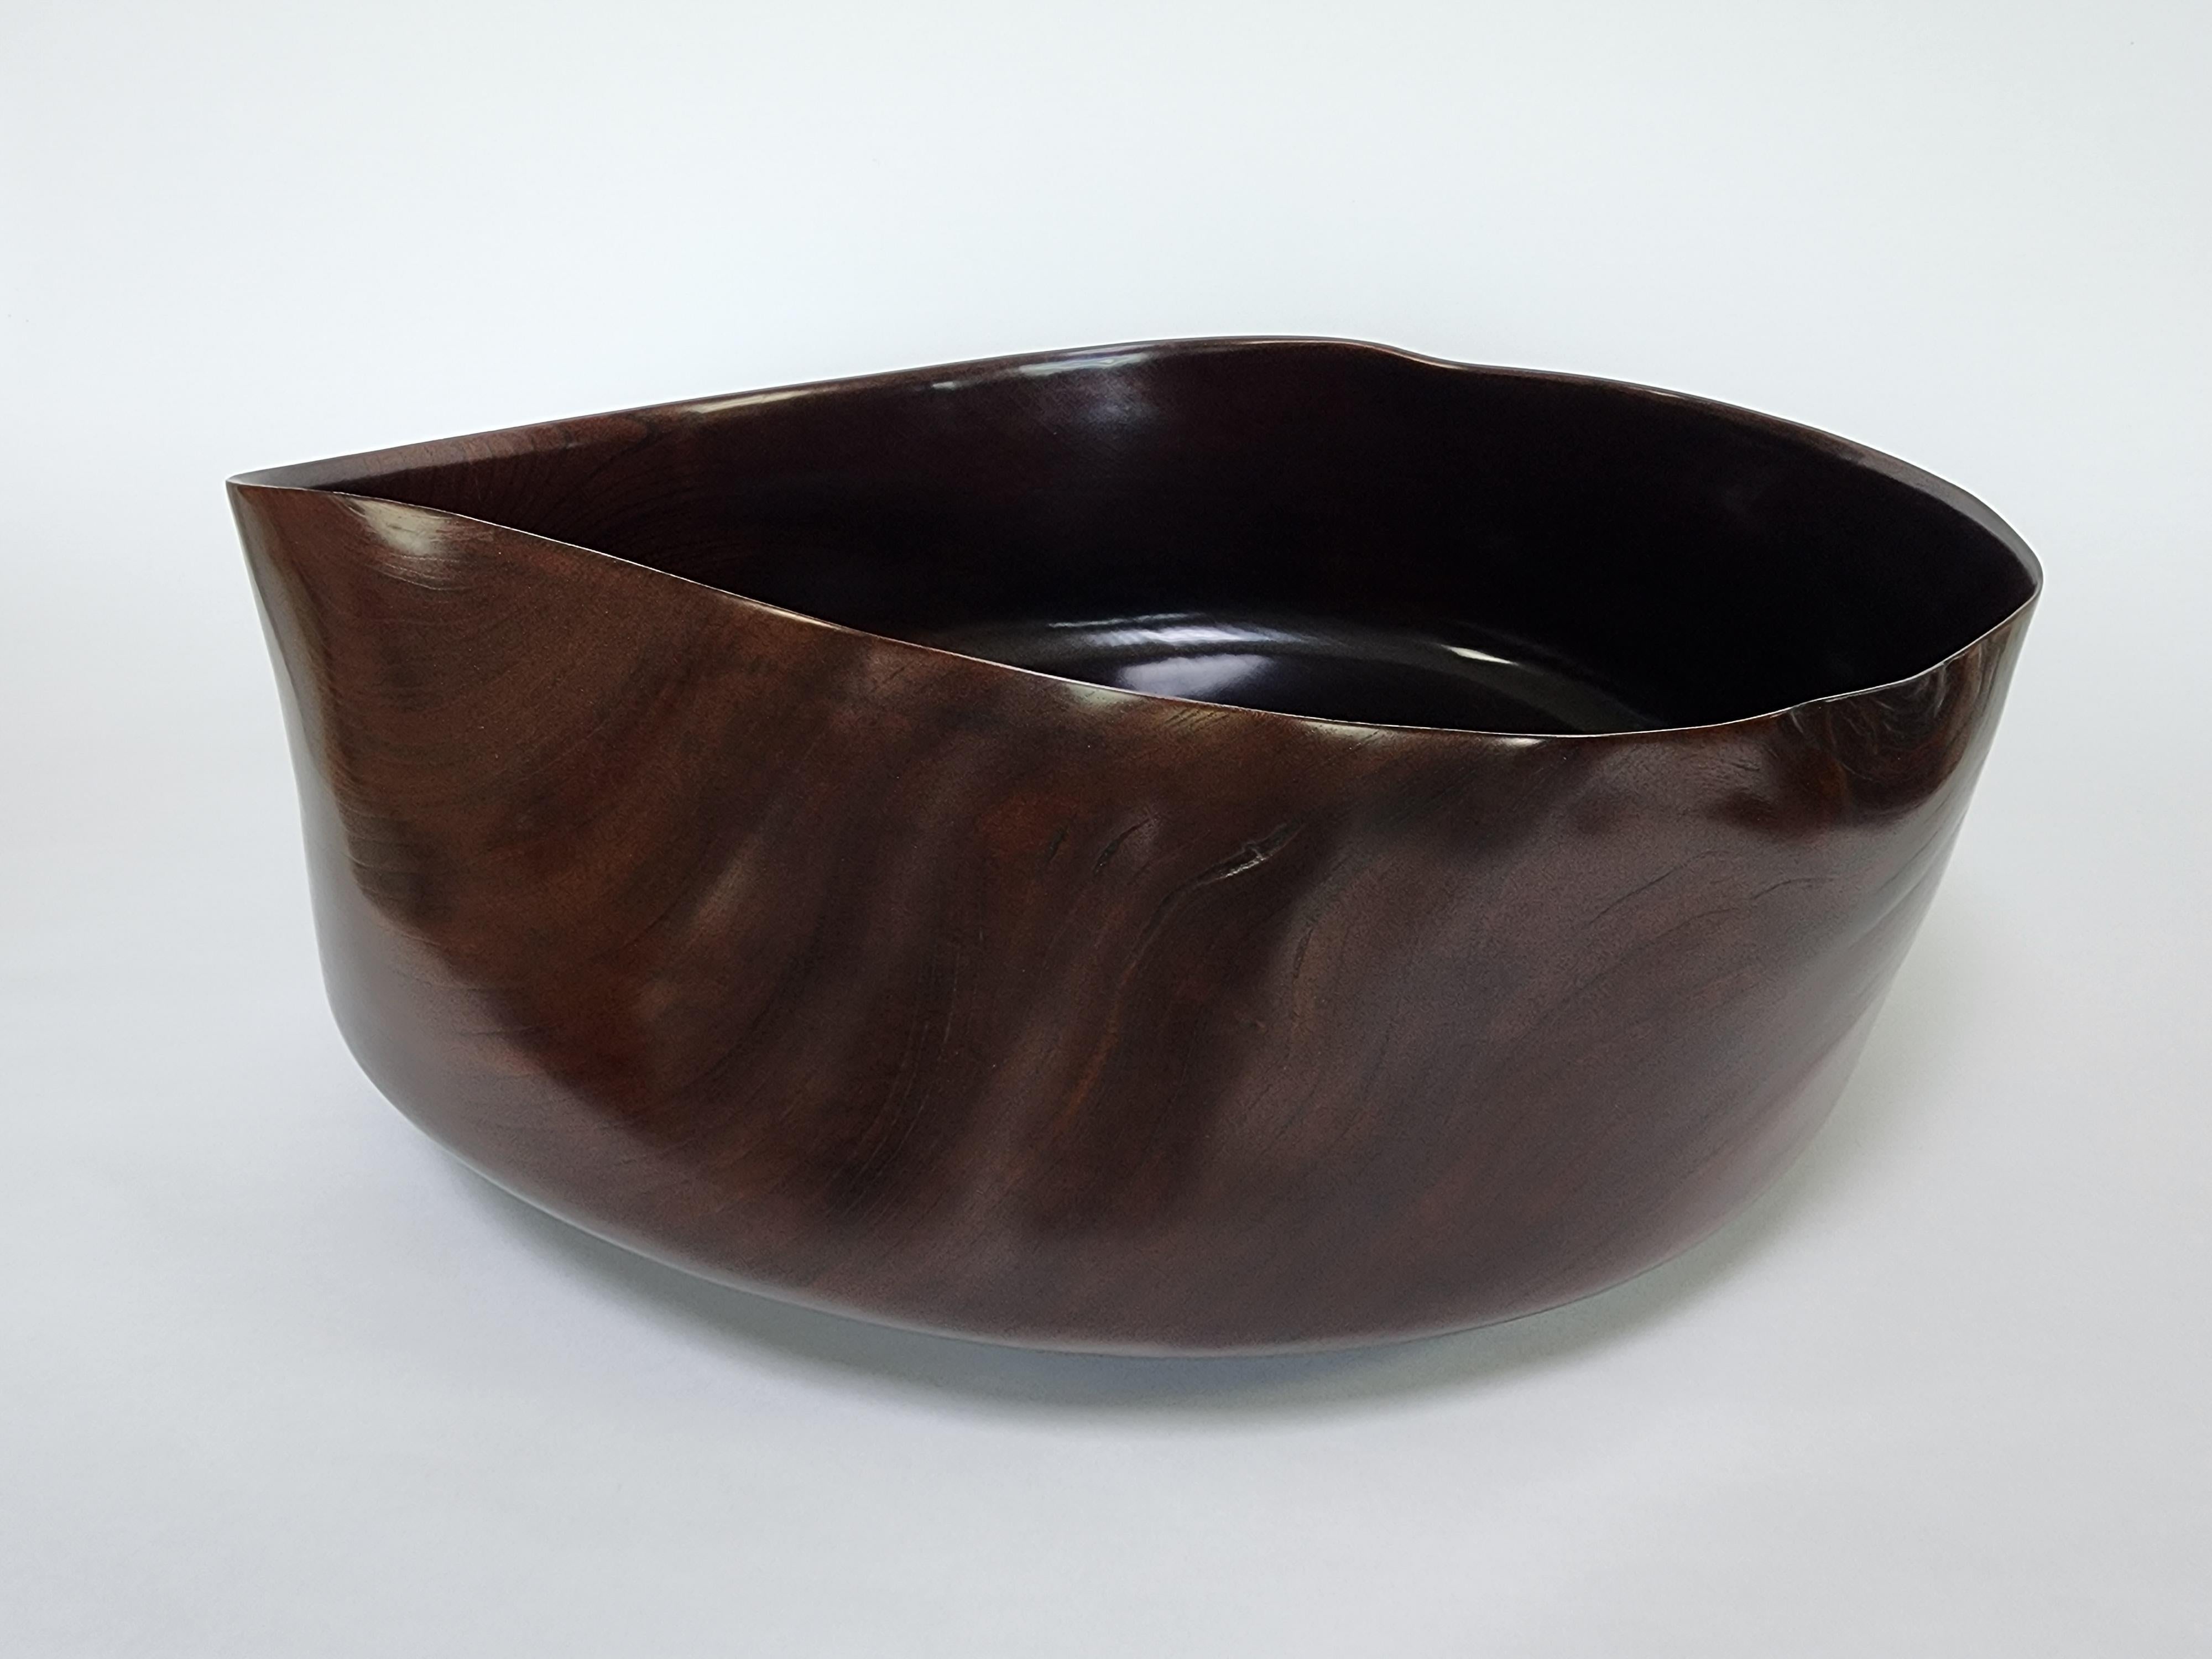 Hand-Crafted Contemporary For 03 L bowl by Sukkeun Kang For Sale